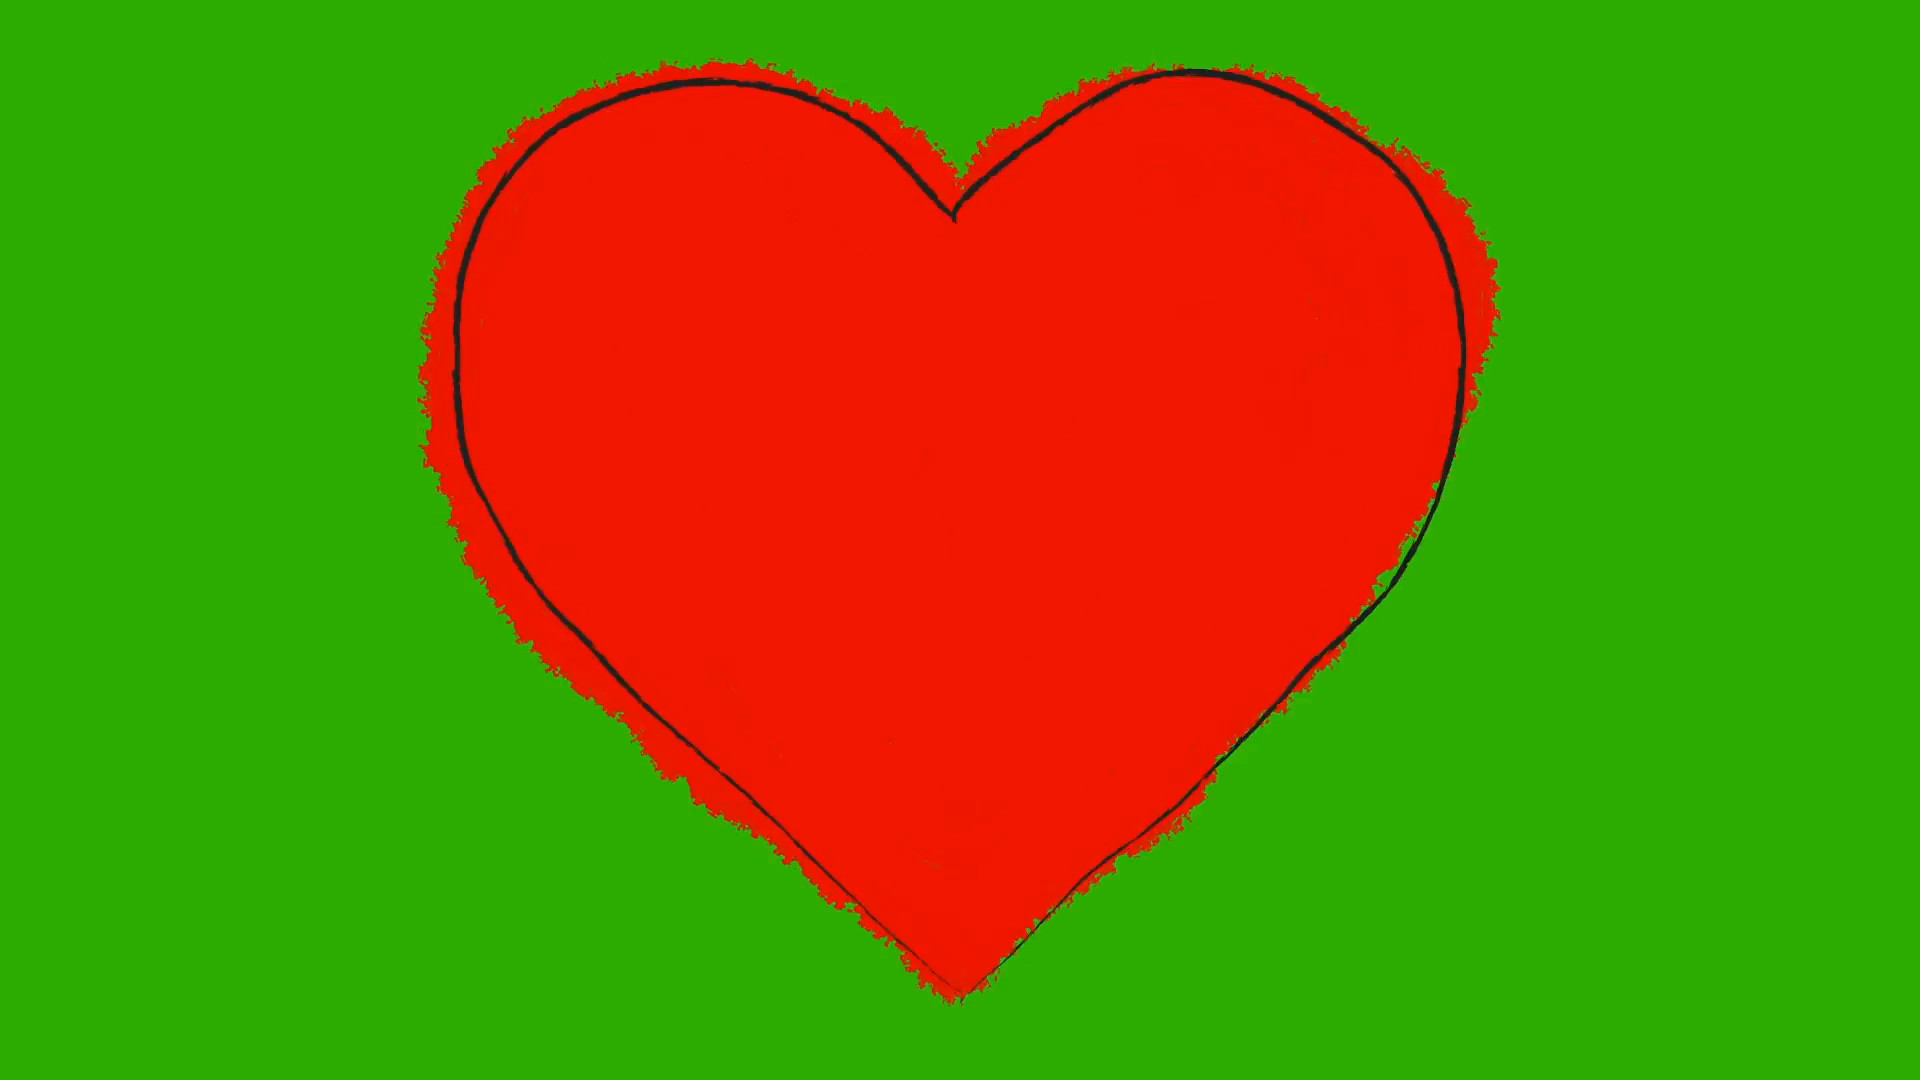 1920x1080 Subscription Library Animated Cartoon of a Beating Big Red Heart on a Green  Screen